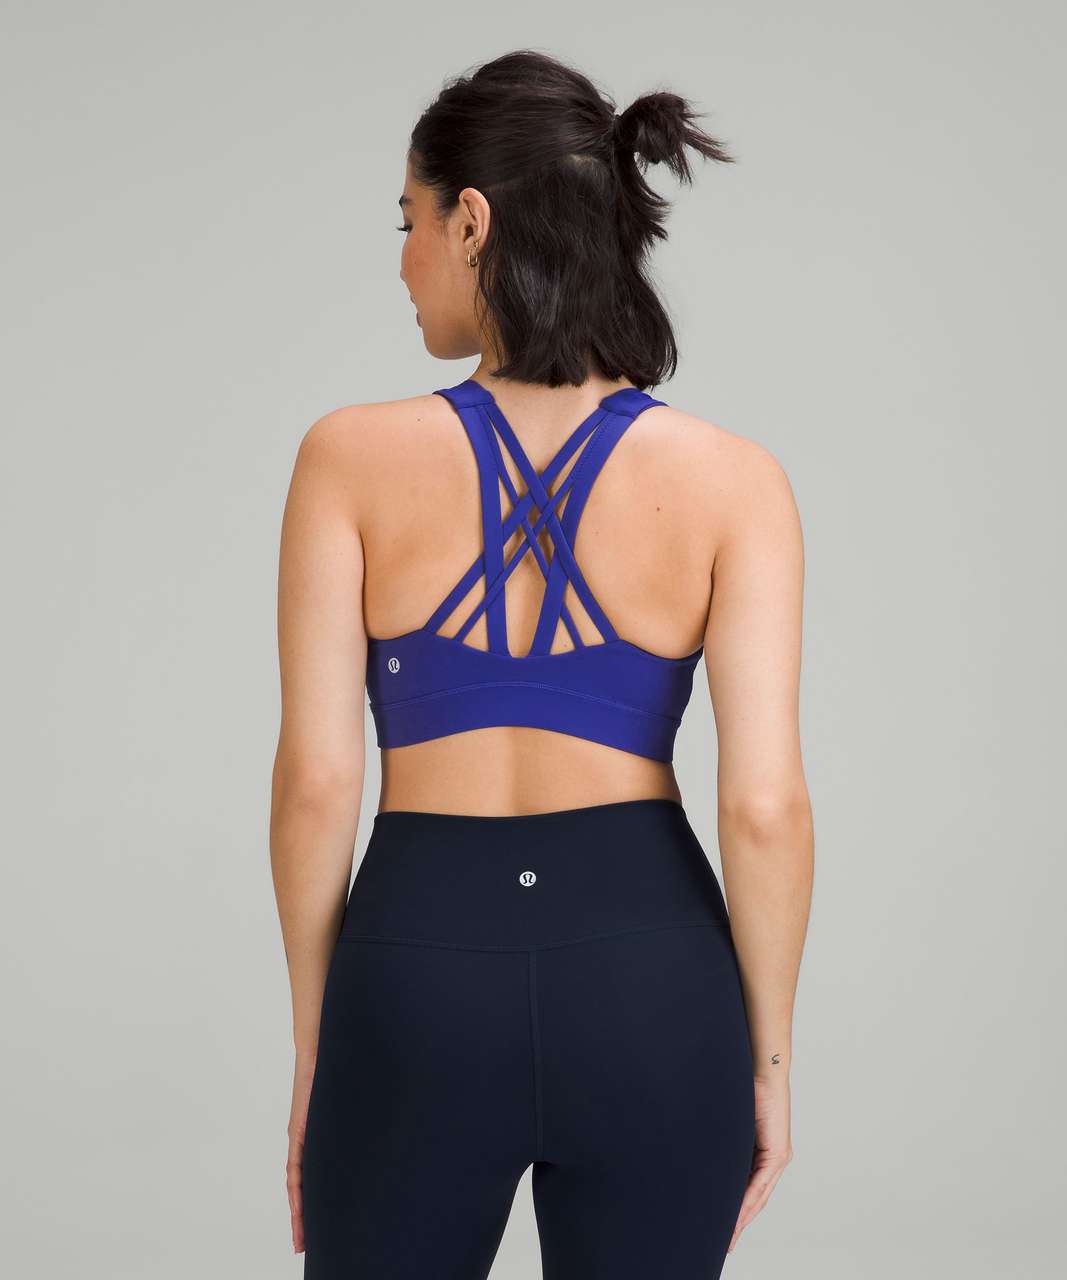 Lululemon Free to Be Elevated Bra *Light Support, DD/DDD(E) Cup